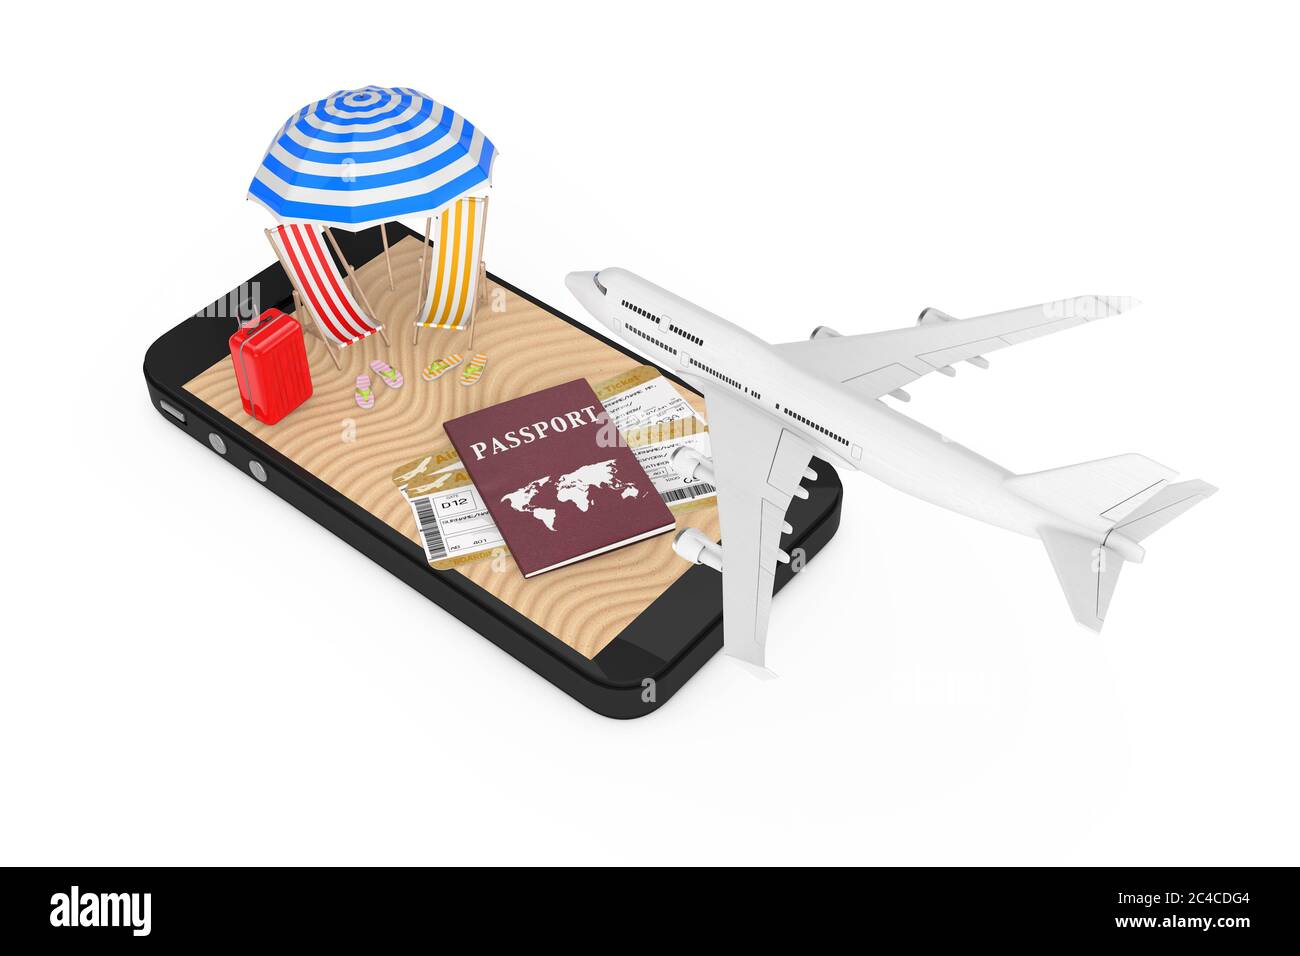 Booking Online Tickets Concept. White Jet Passenger's Airplane Flying Over Mobile Phone with Passport, Tickets and Sand Tropical Beach on a white back Stock Photo